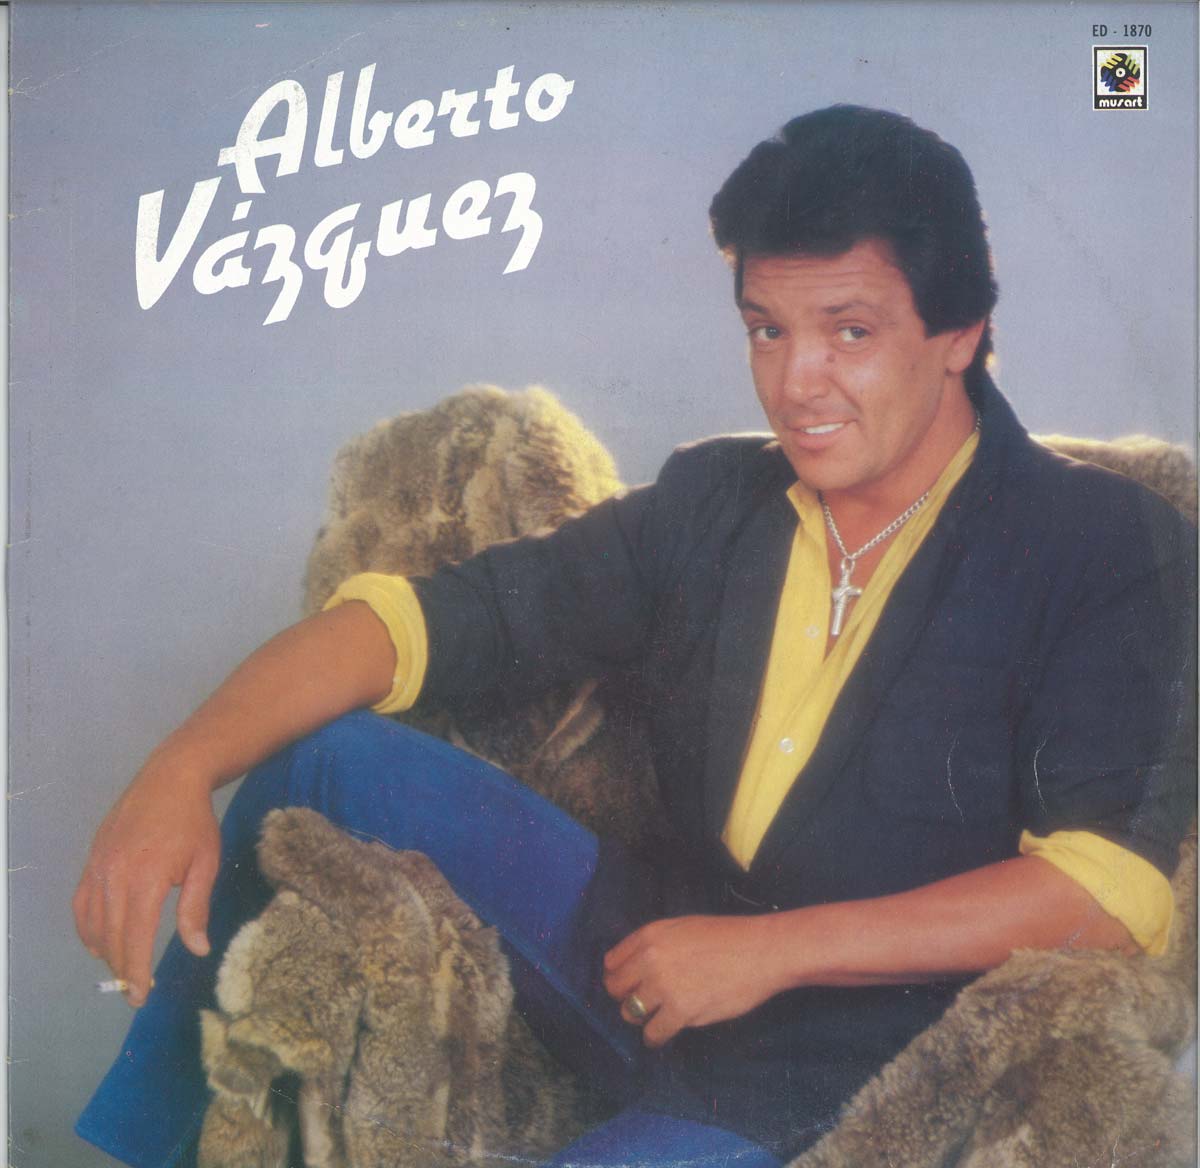 Featured Image for “Alberto Vázquez”